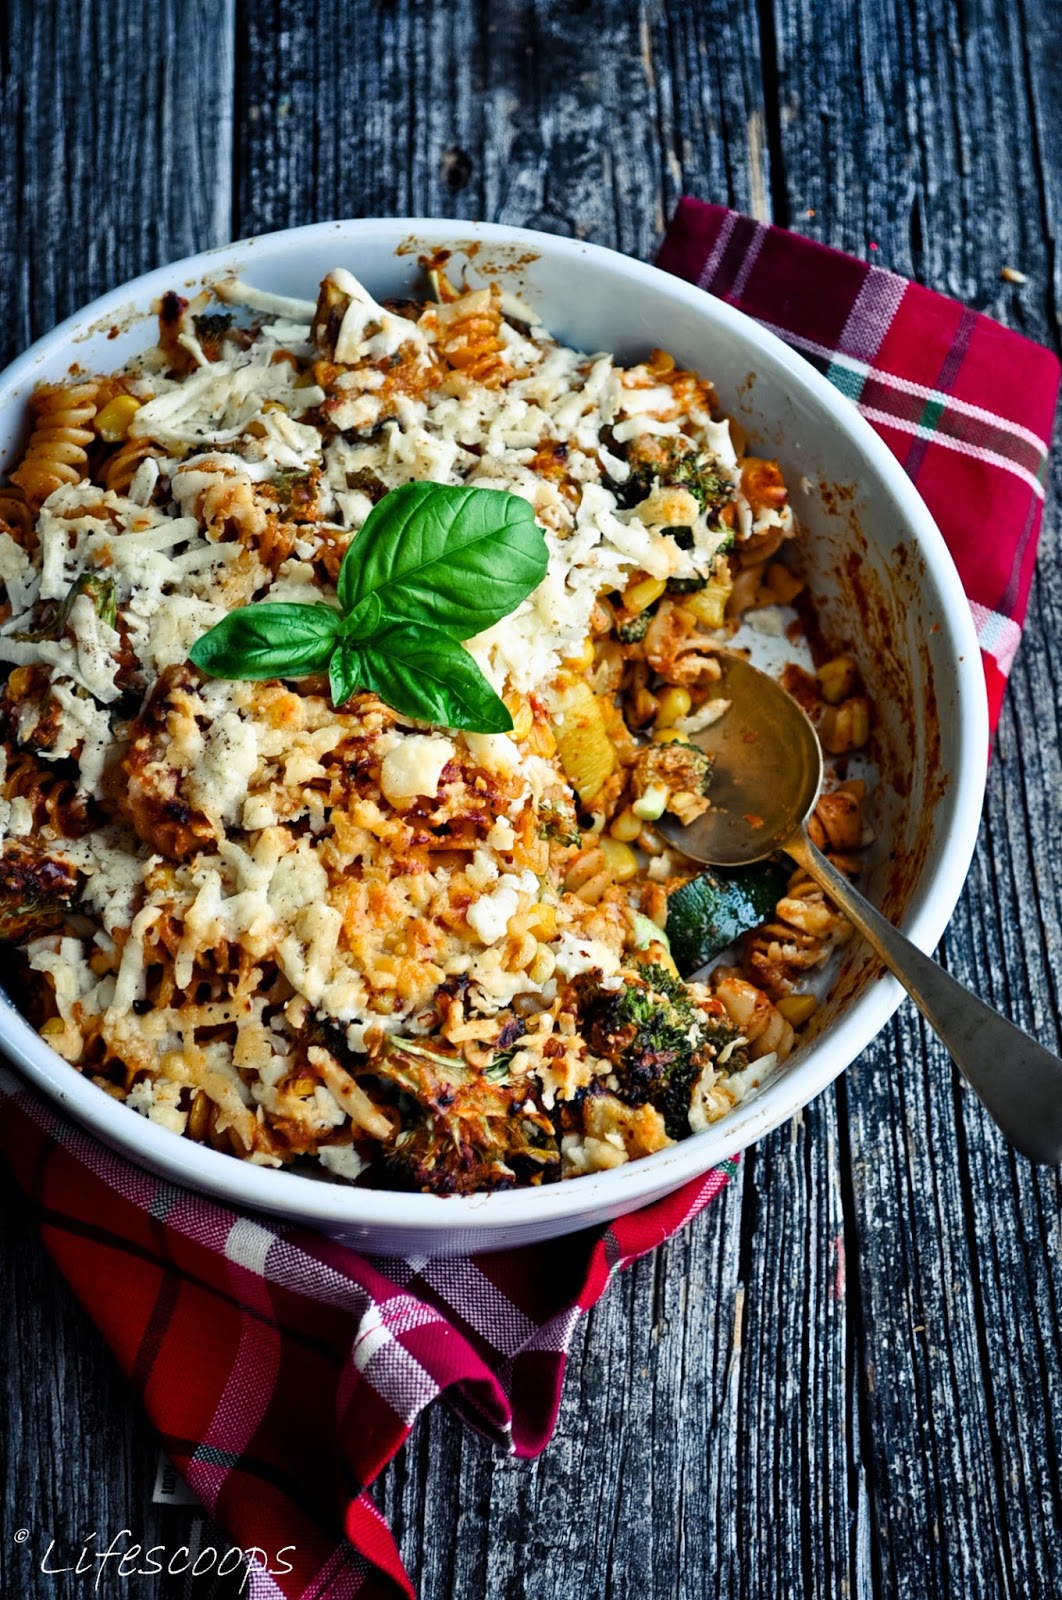 Life Scoops: Cheesy Baked Pasta Casserole with Grilled Vegetables